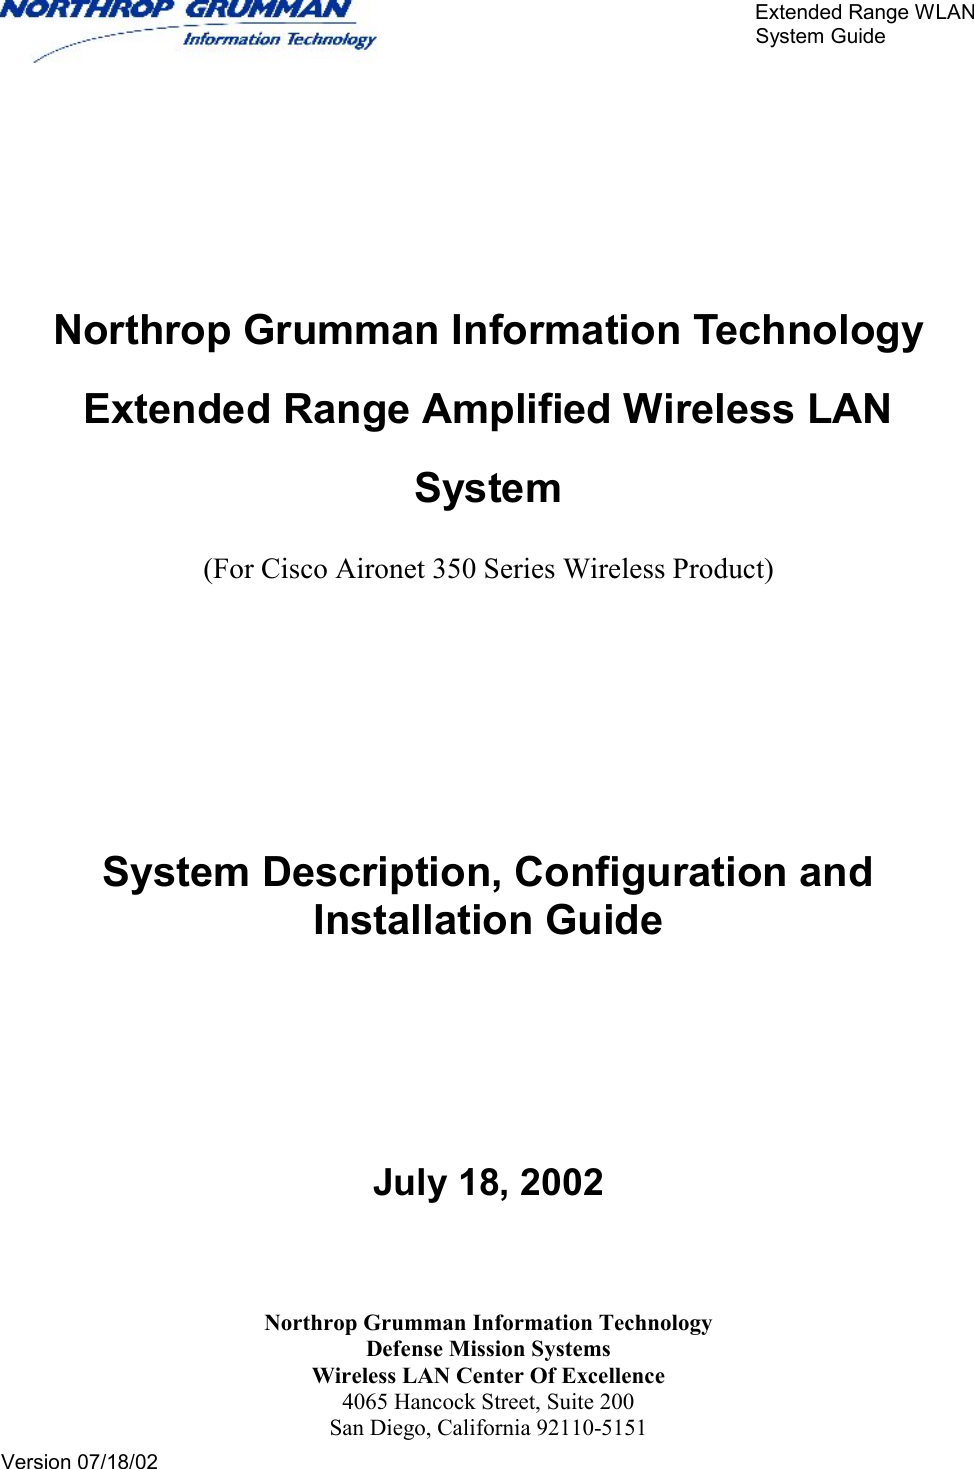       Extended Range WLAN                                                     System Guide     Version 07/18/02         Northrop Grumman Information Technology Extended Range Amplified Wireless LAN System  (For Cisco Aironet 350 Series Wireless Product)    System Description, Configuration and Installation Guide         July 18, 2002   Northrop Grumman Information Technology Defense Mission Systems Wireless LAN Center Of Excellence 4065 Hancock Street, Suite 200 San Diego, California 92110-5151 